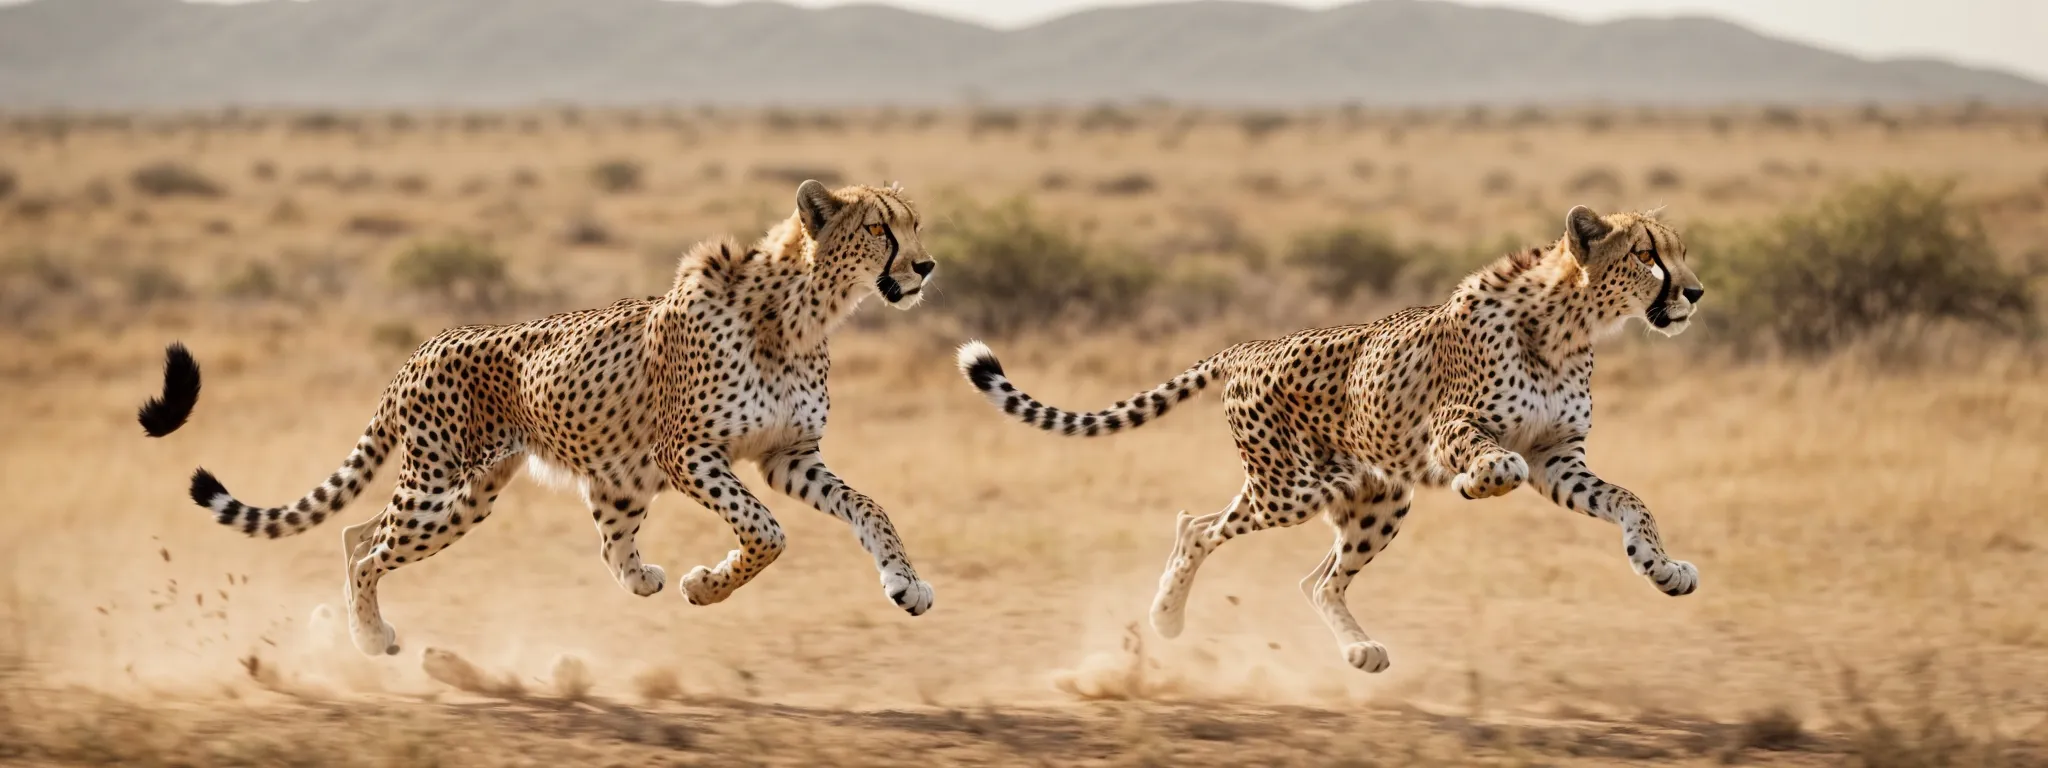 a cheetah in mid-sprint across the savannah, embodying the concept of speed and performance.